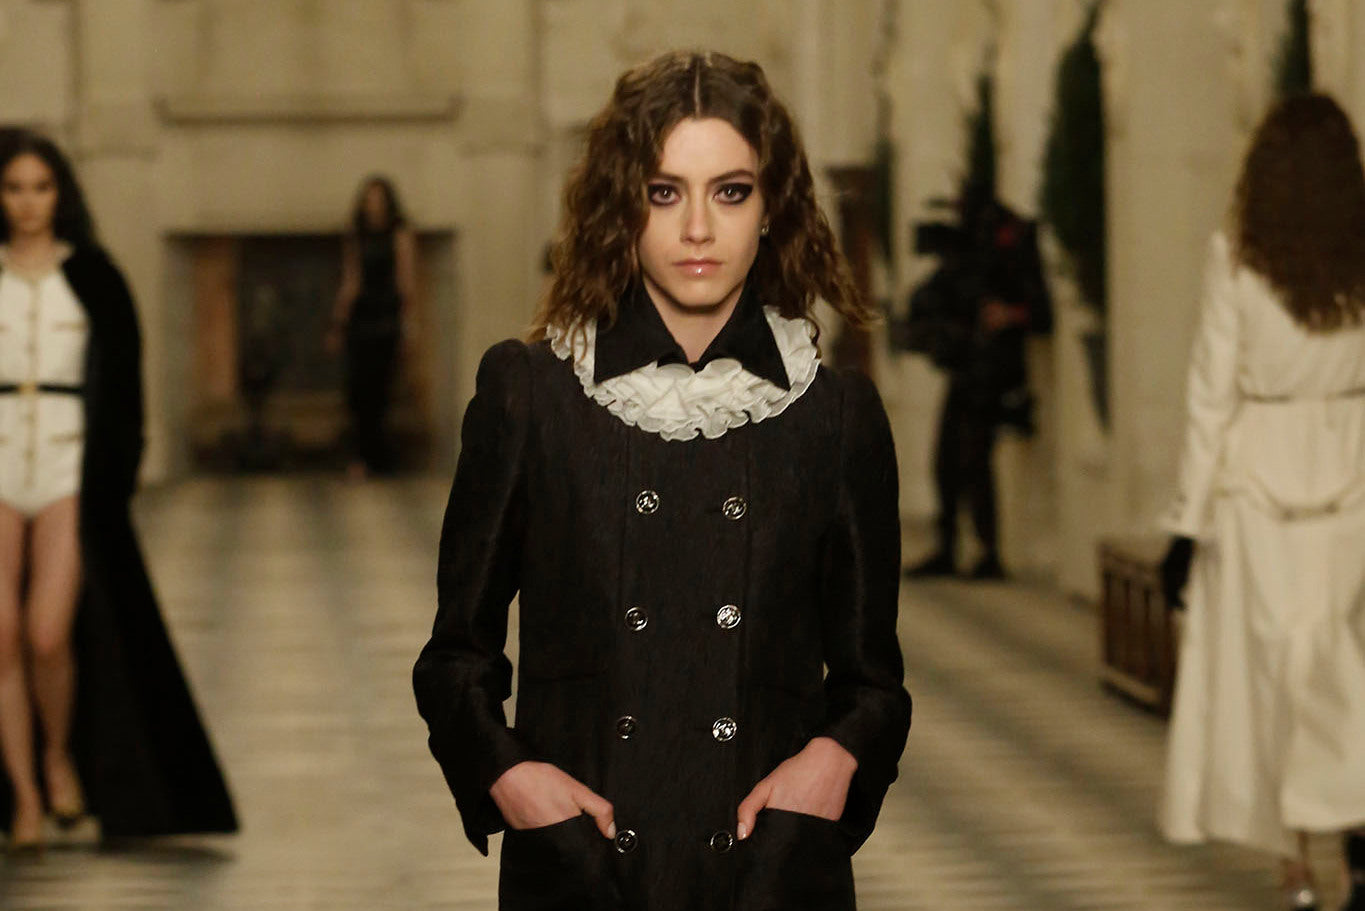 Chanel To Hold Métiers d'Art Show In Home Country, France